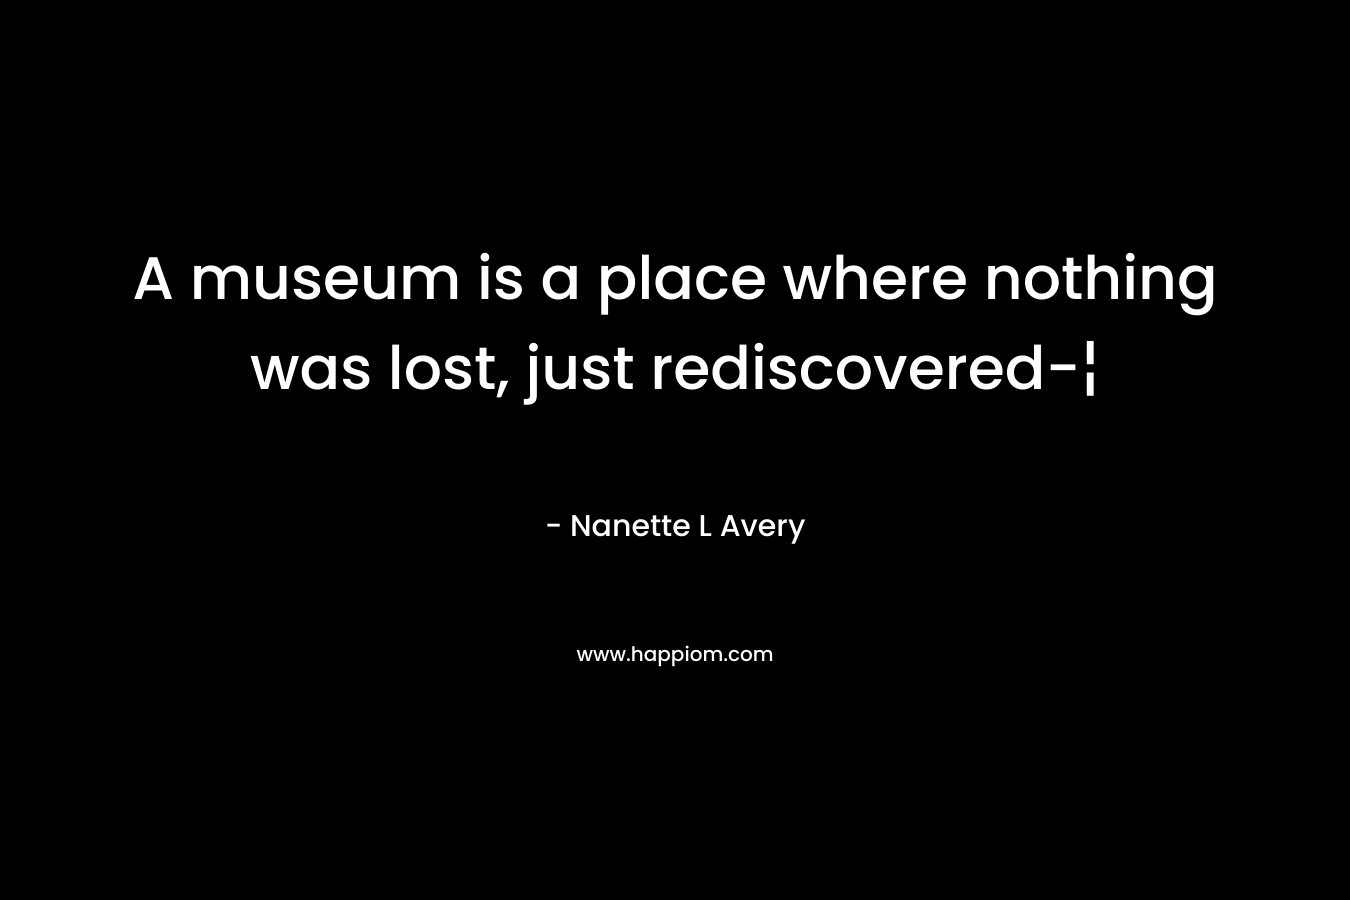 A museum is a place where nothing was lost, just rediscovered-¦